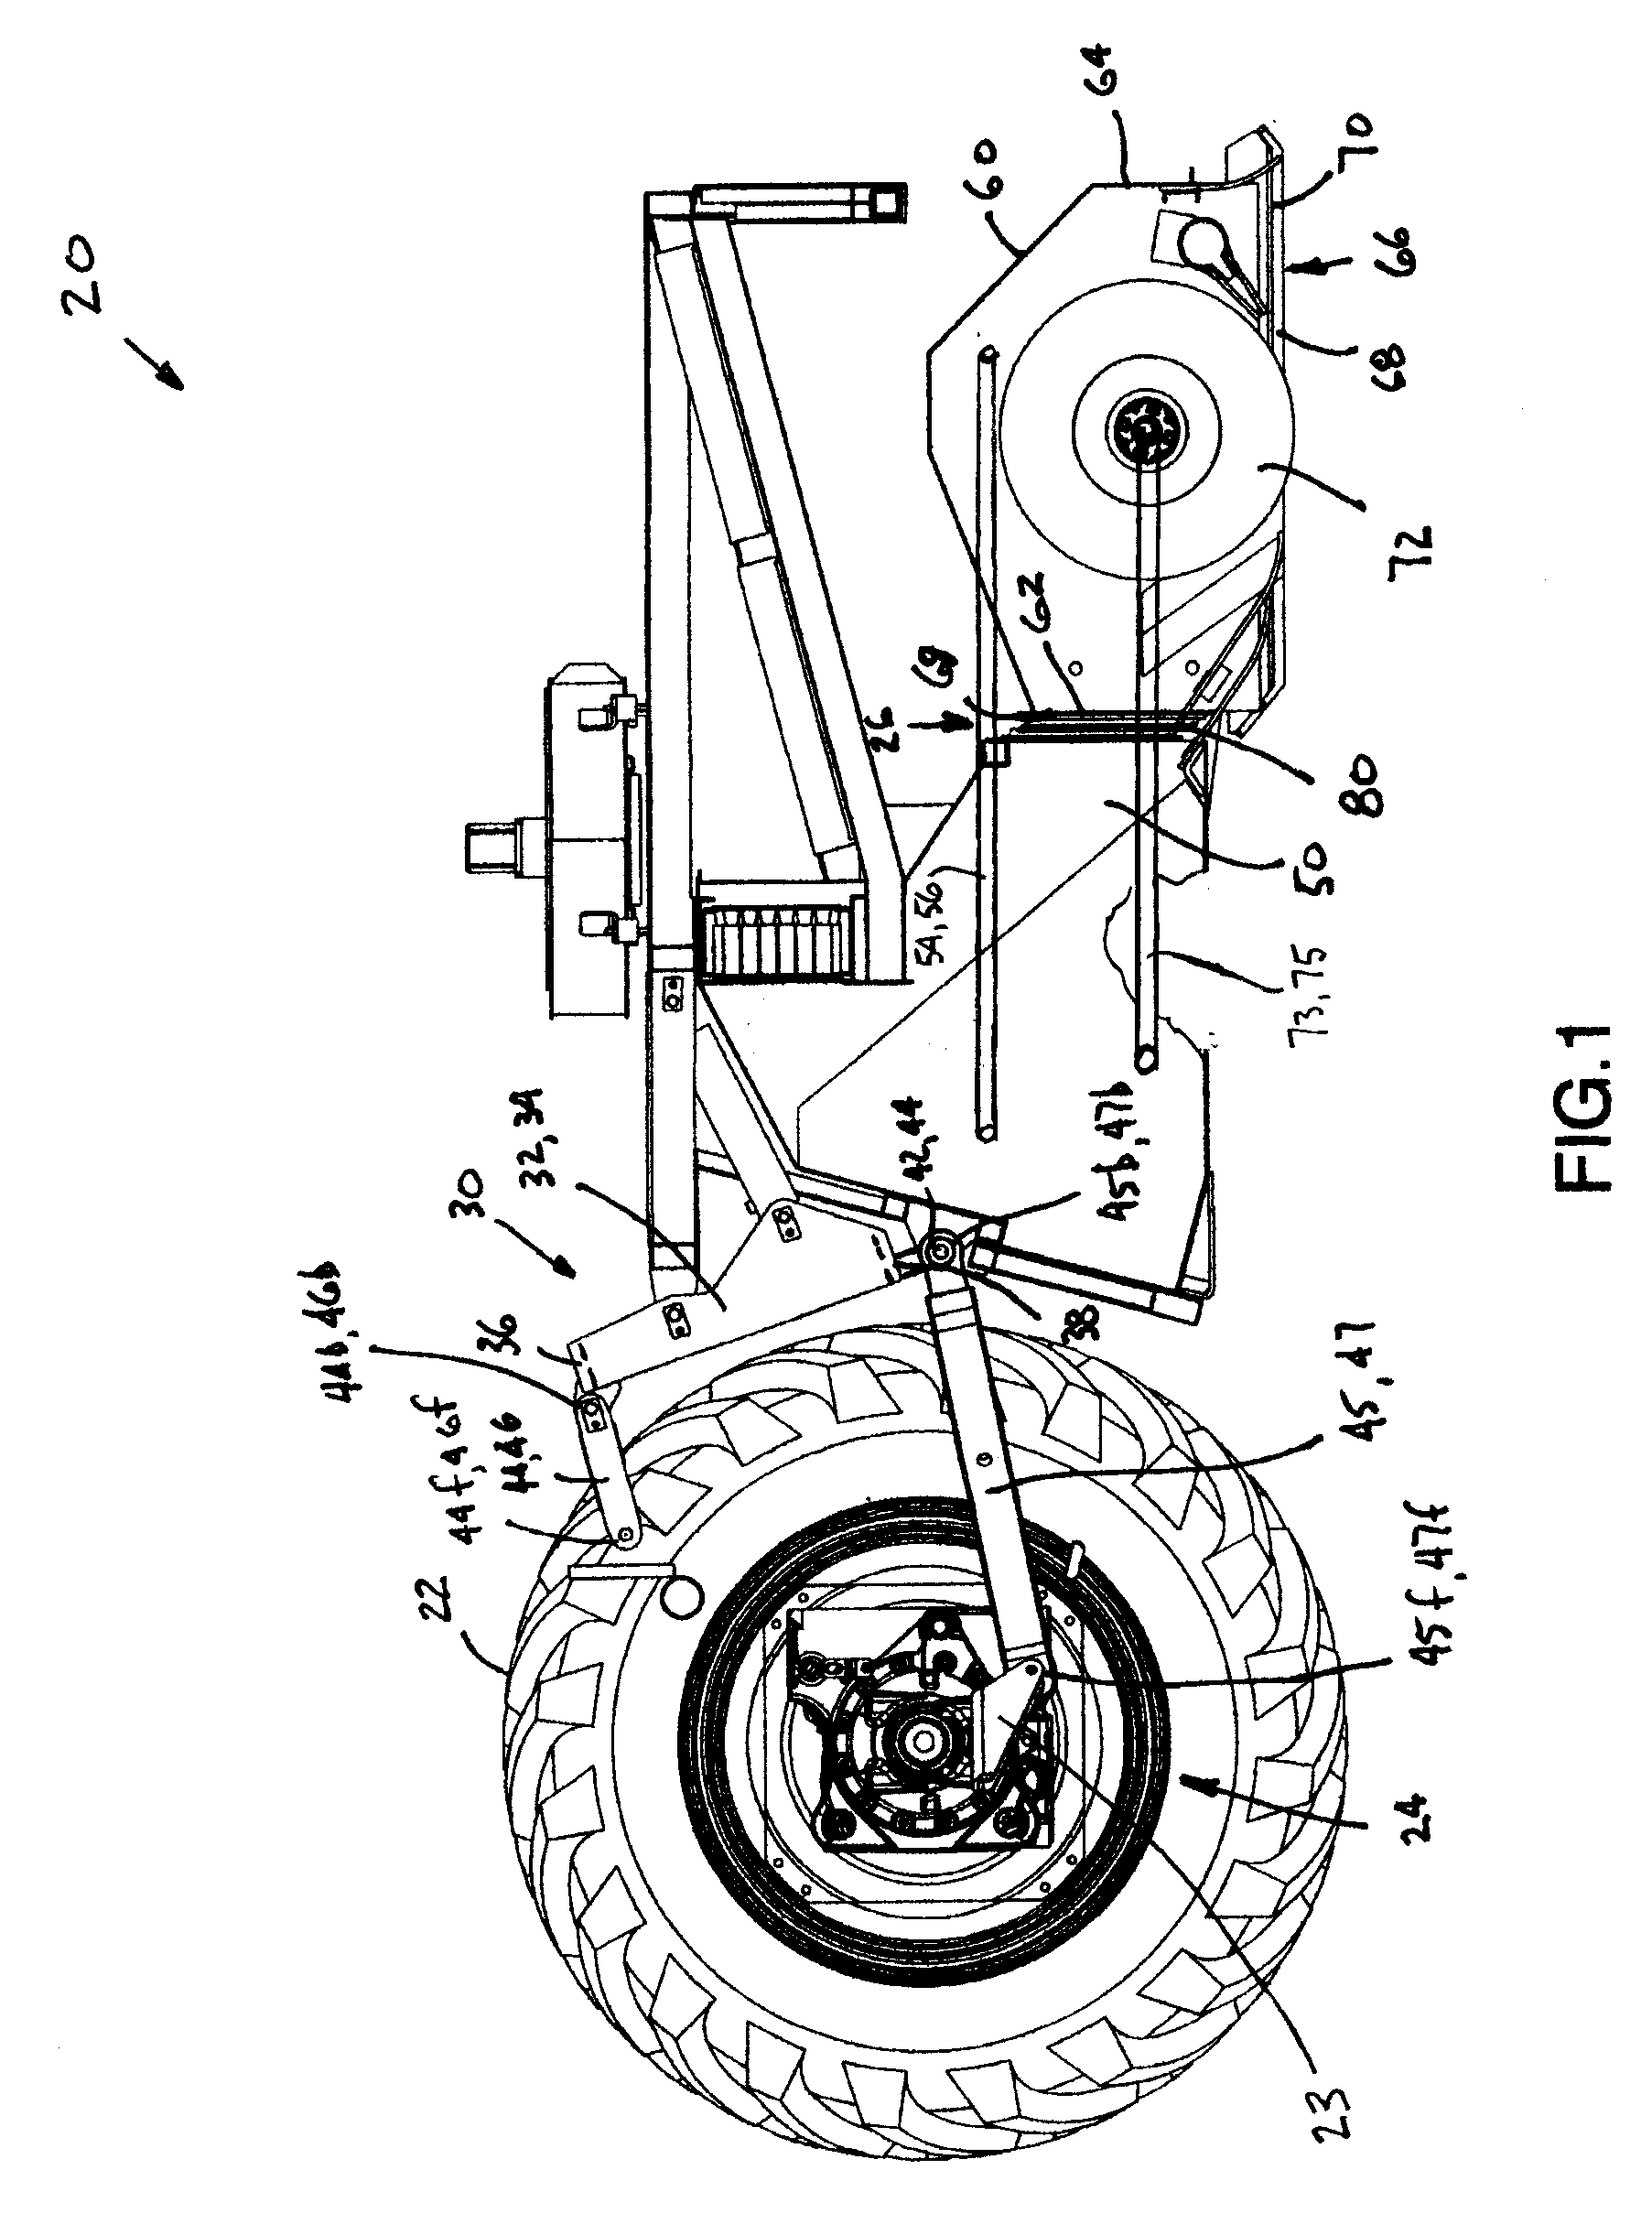 Surface tracking sweeping broom apparatus for use with a vehicle